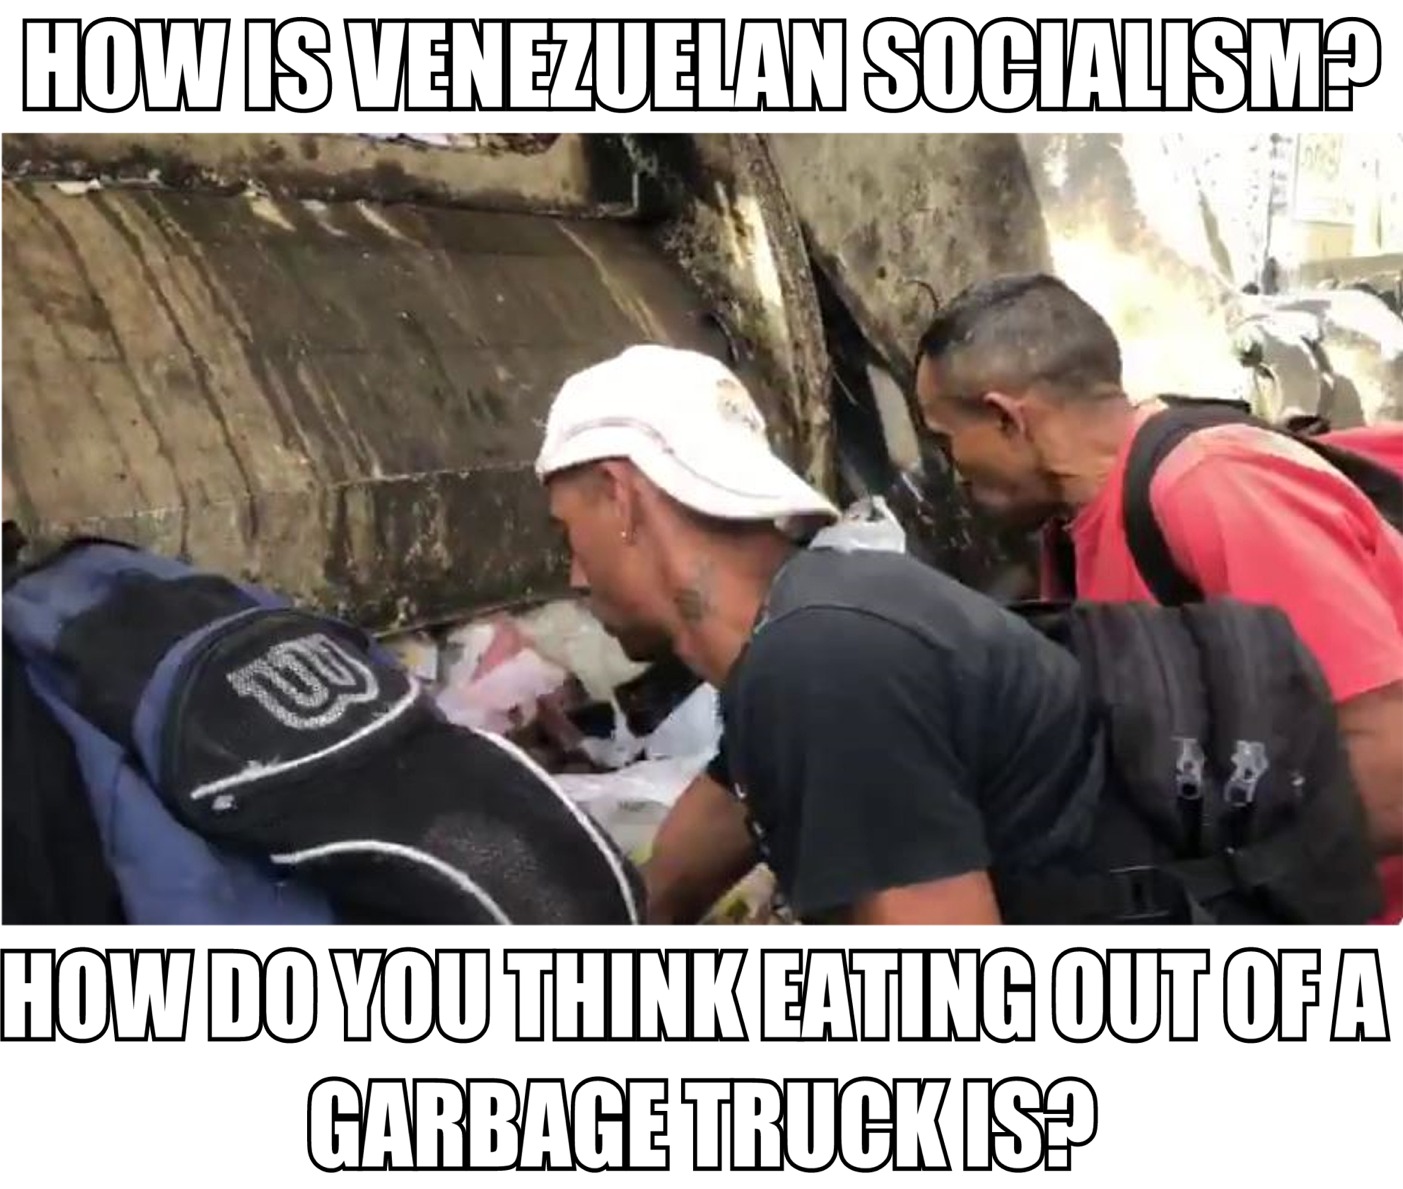 memes -  photo caption - How Is Venezuelan Socialism How Do You Think Eating Out Ofa Garbage Truck Is?